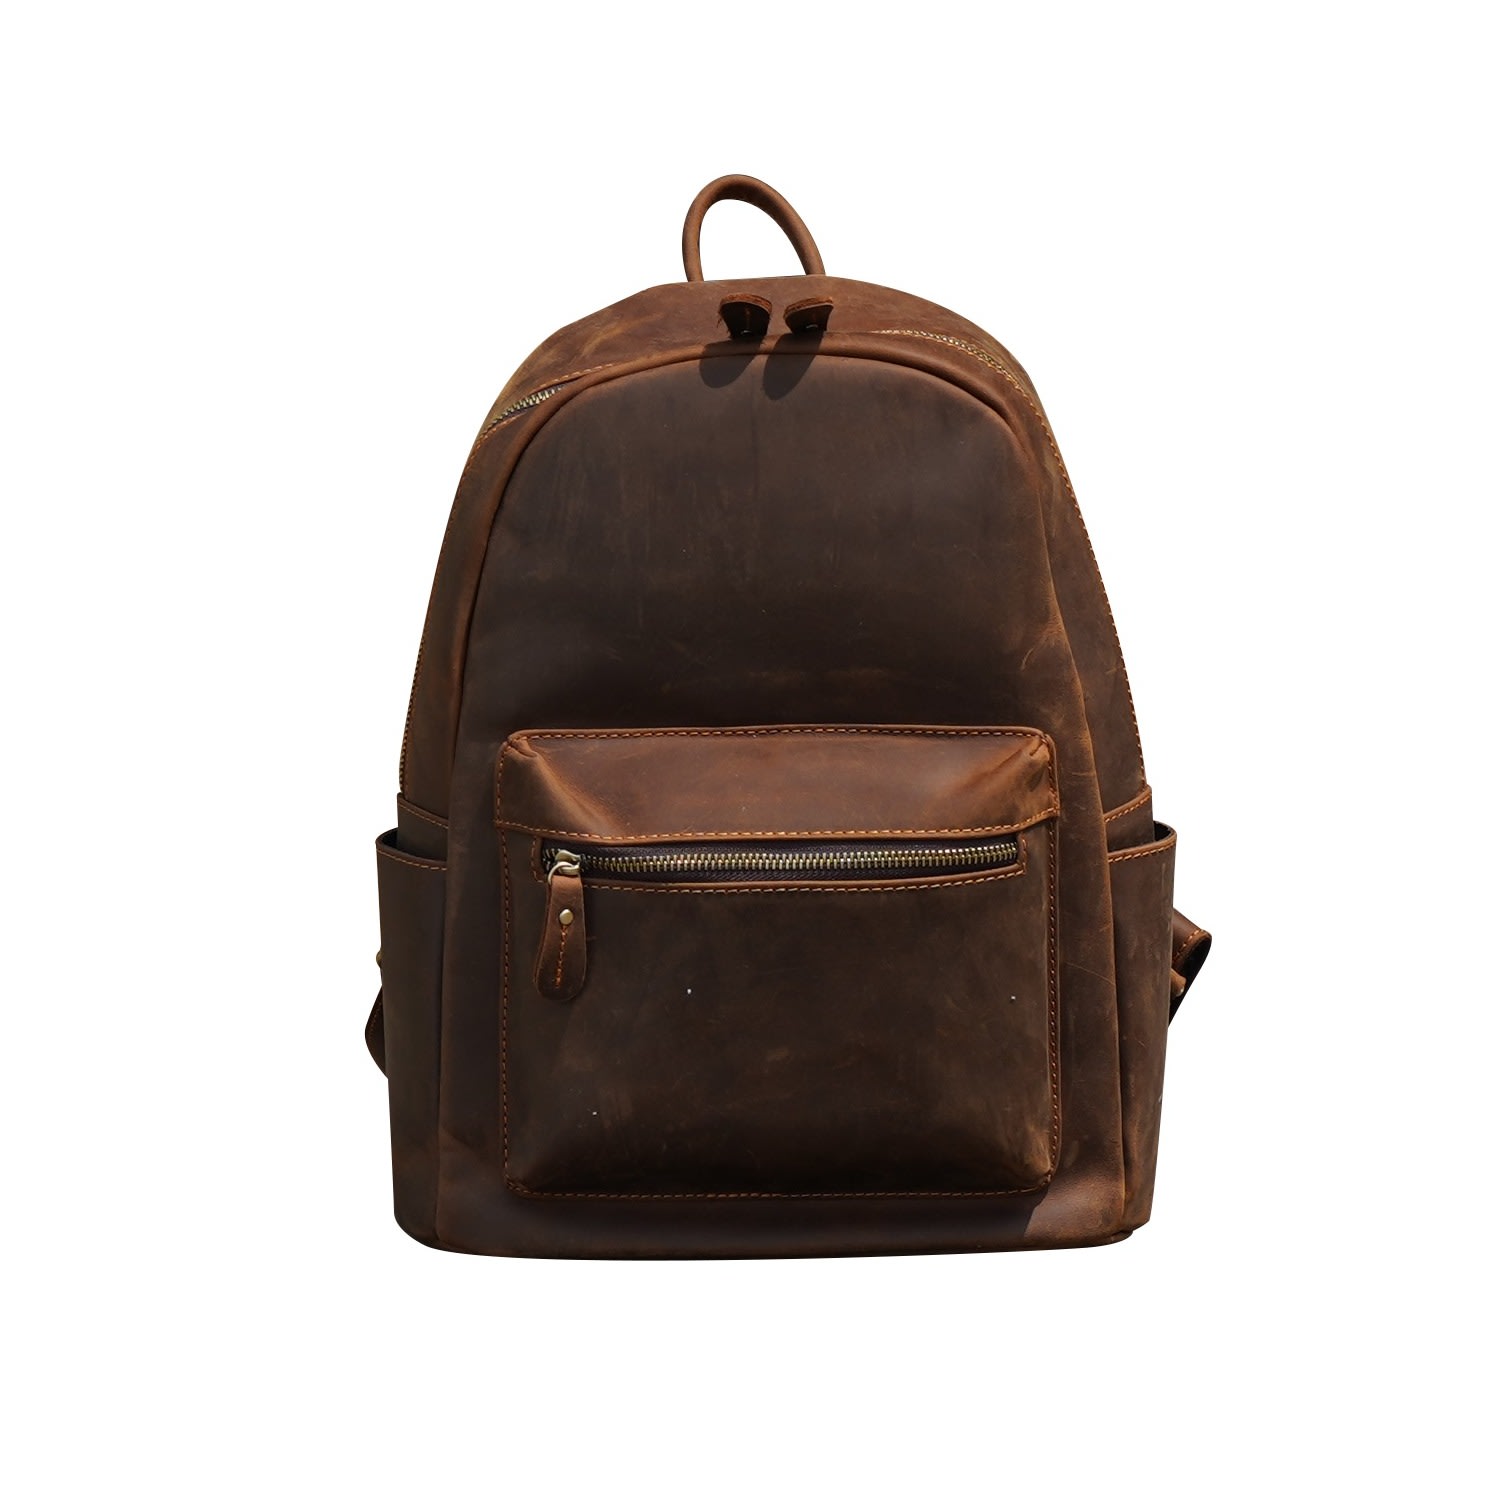 Women’s Brown Front Pocket Vintage Look Leather Backpack Touri